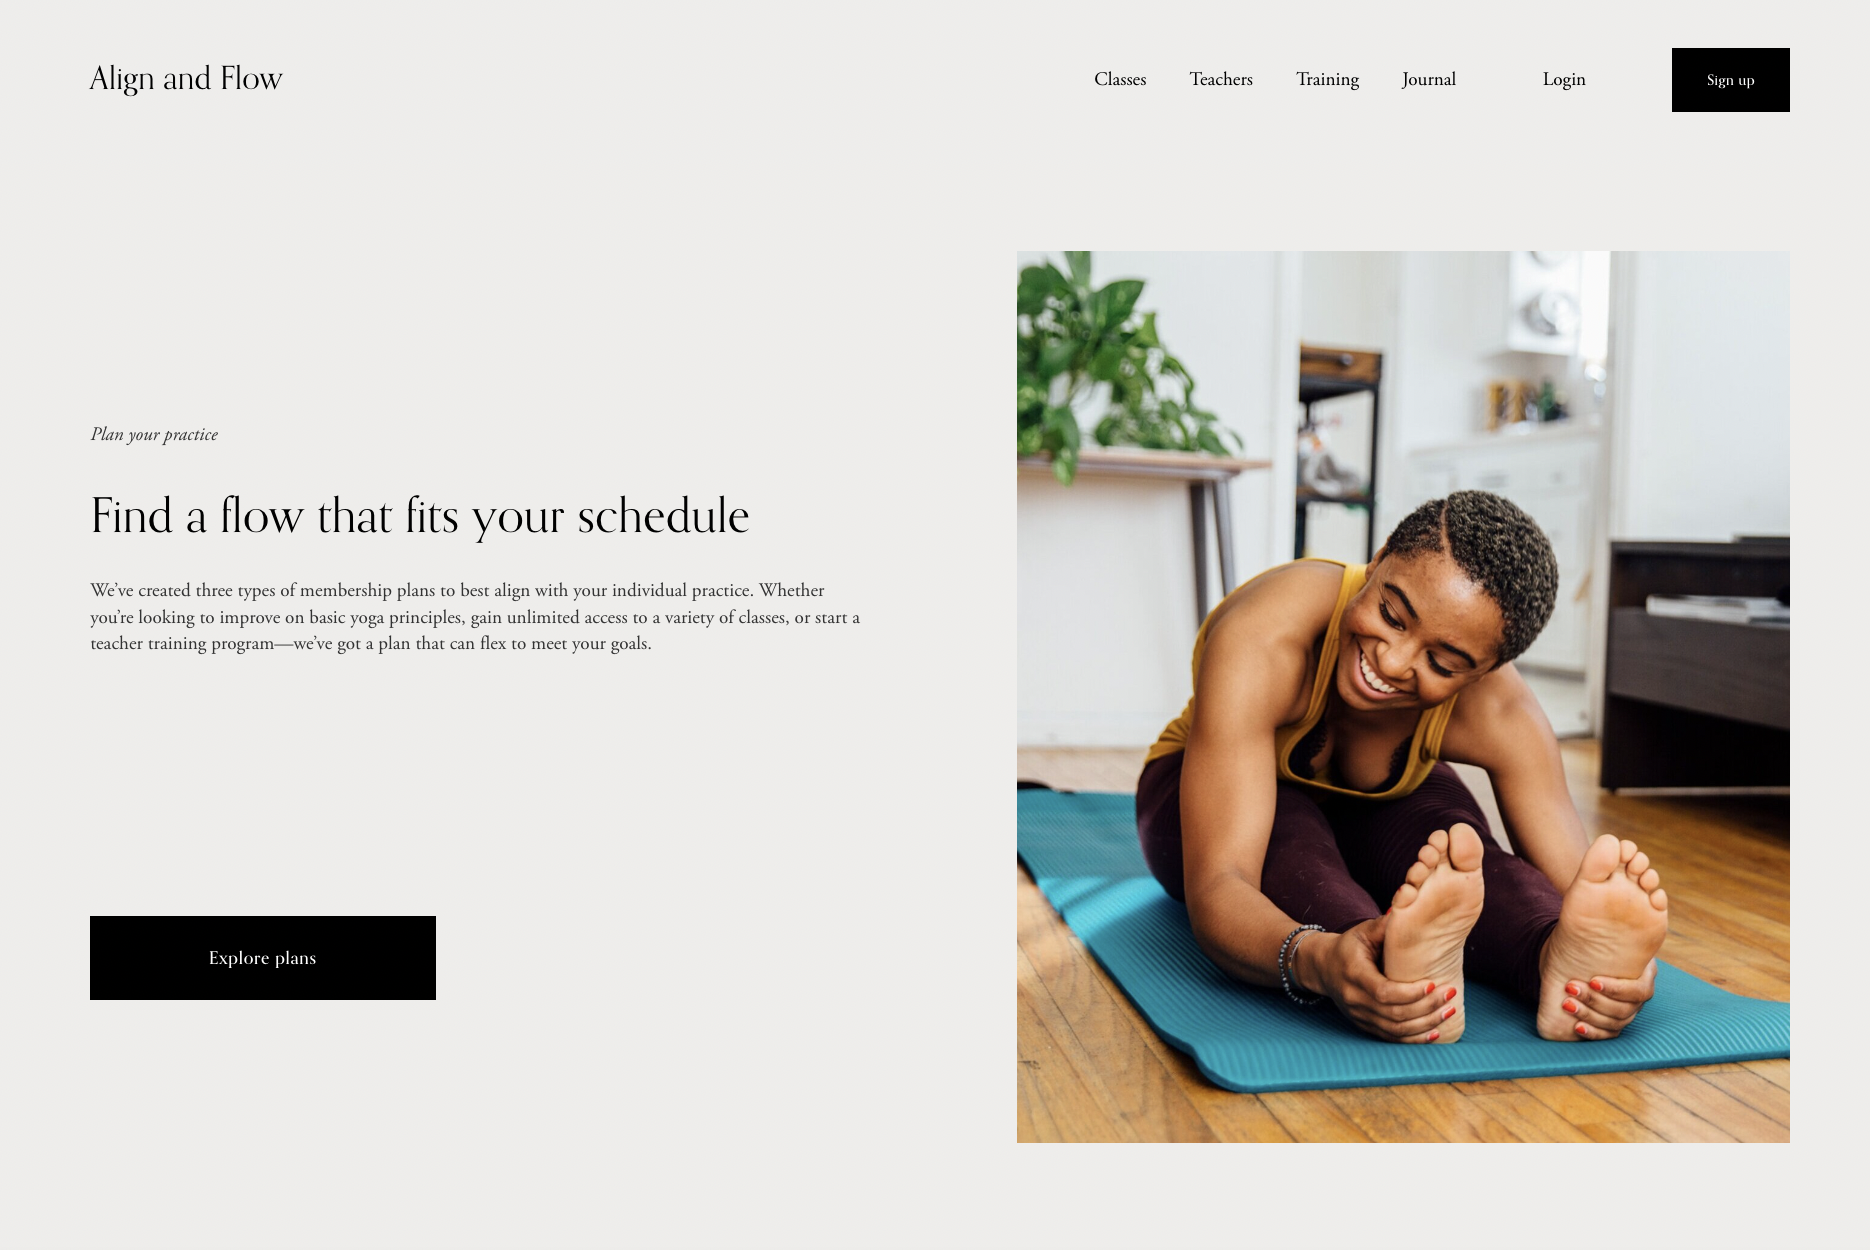 How to Start Teaching Yoga Online: A Step-by-step Guide - Mykademy